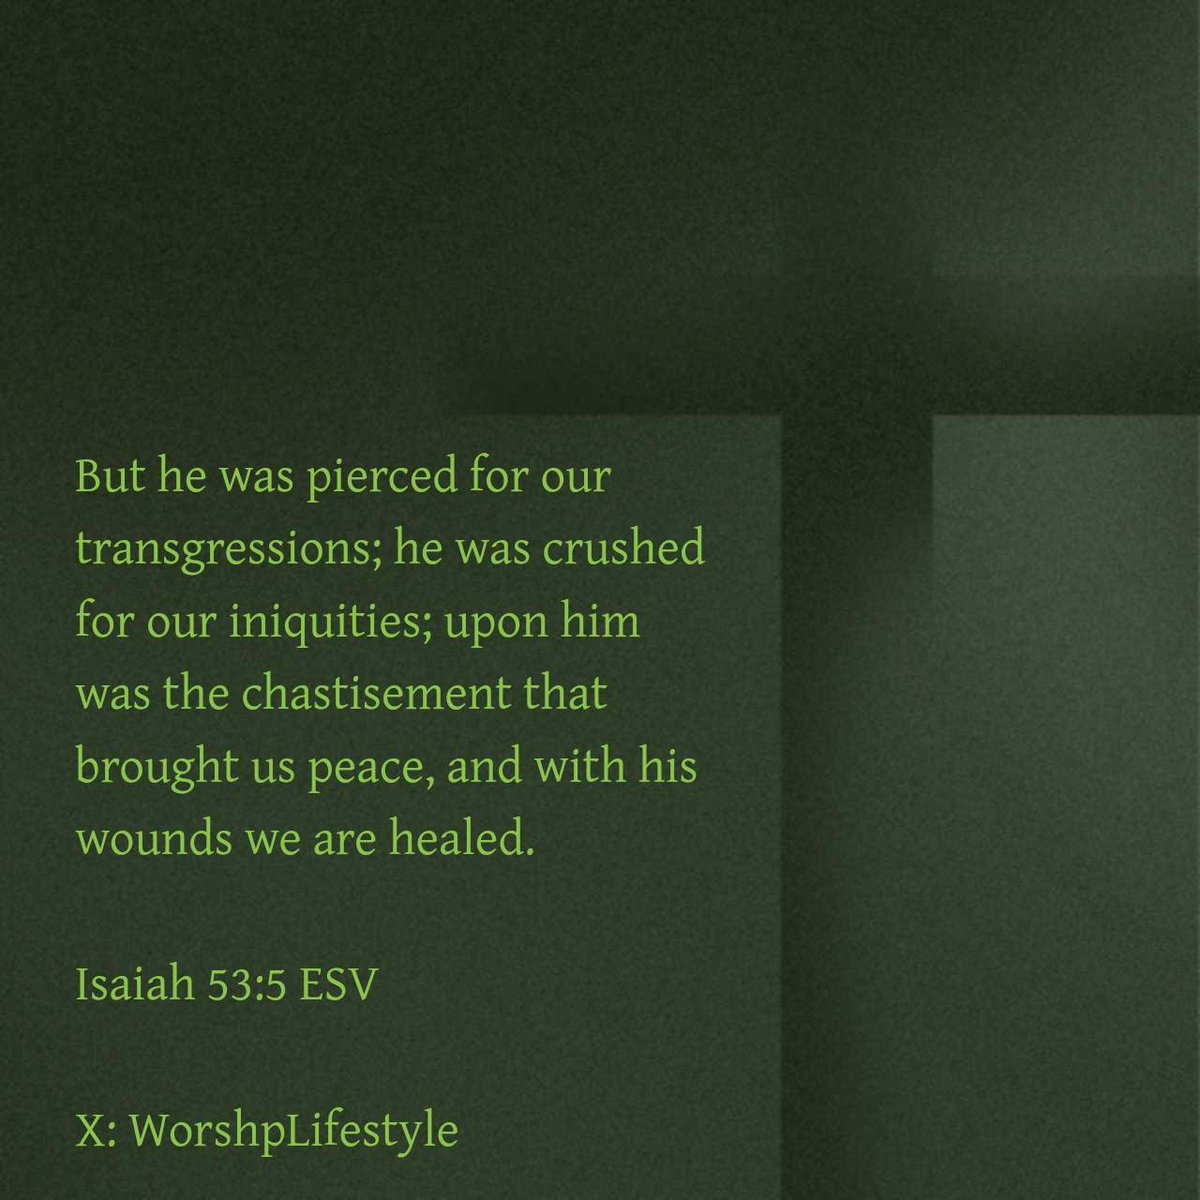 Isaiah 53:5 ESV
But he was pierced for our transgressions; he was crushed for our iniquities; upon him was the chastisement that brought us peace, and with his wounds we are healed.

bible.com/bible/59/isa.5…
#VerseOfTheDay #BibleVerse #WorshpLifestyle #WorshipLifestyle